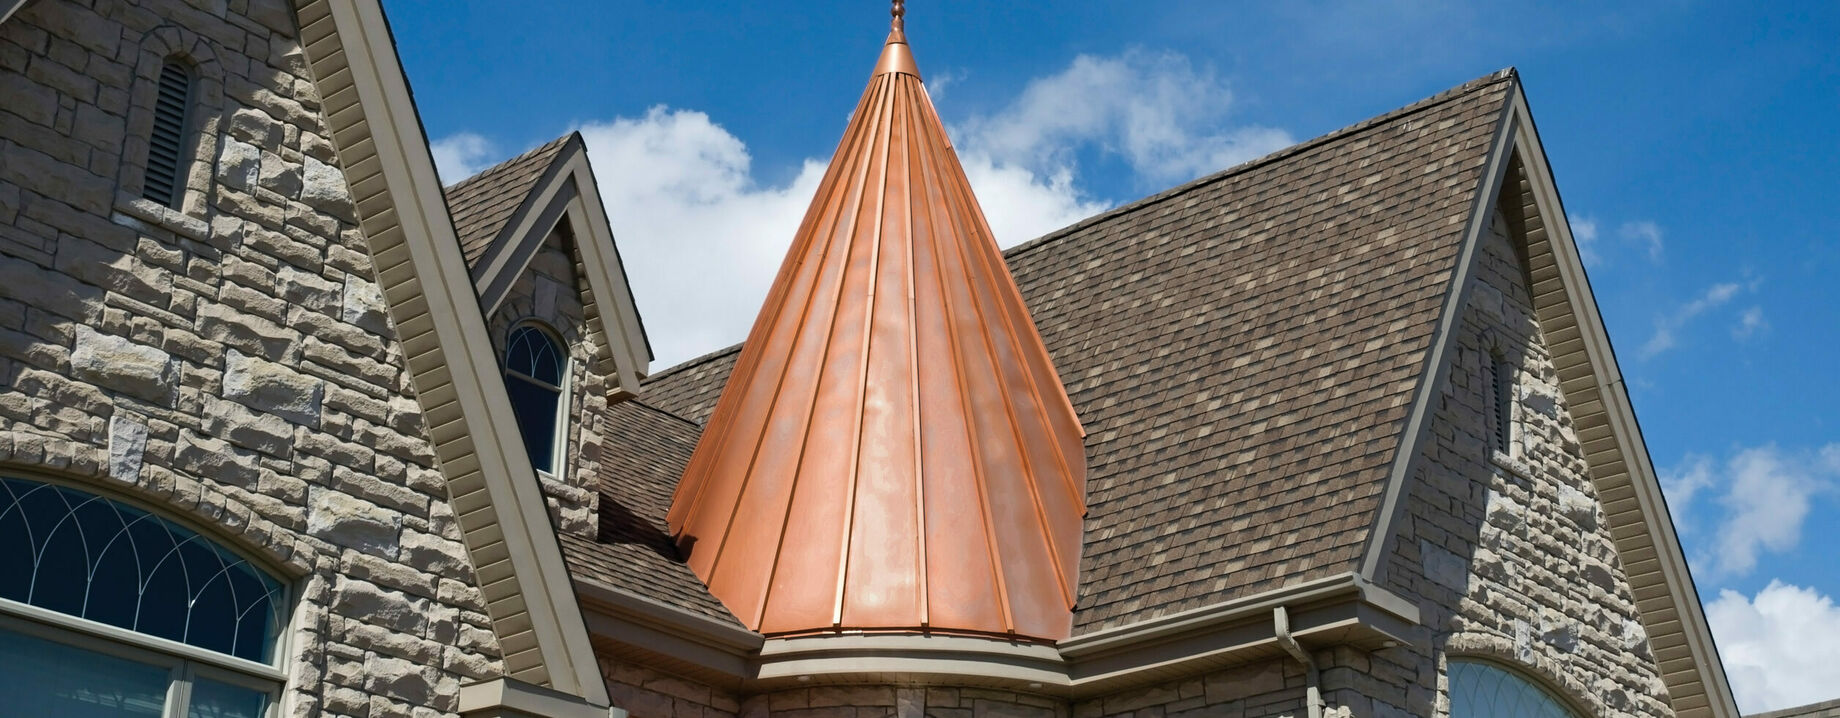 6 Things to Ask a Roofing Contractor